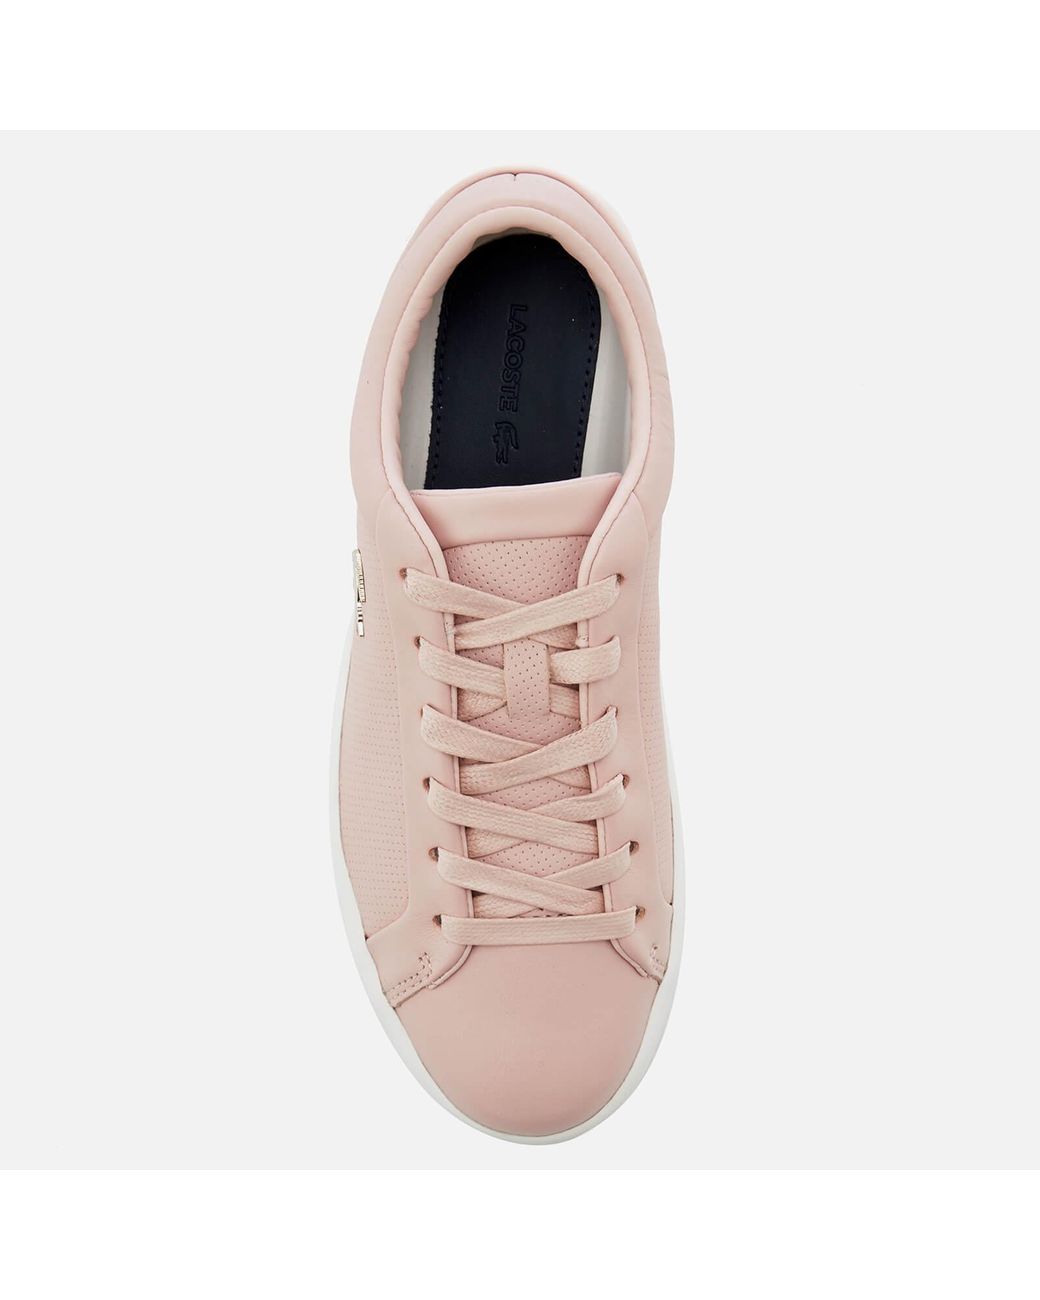 Lacoste Straightset 118 2 Leather Cupsole Trainers in Pink | Lyst Canada